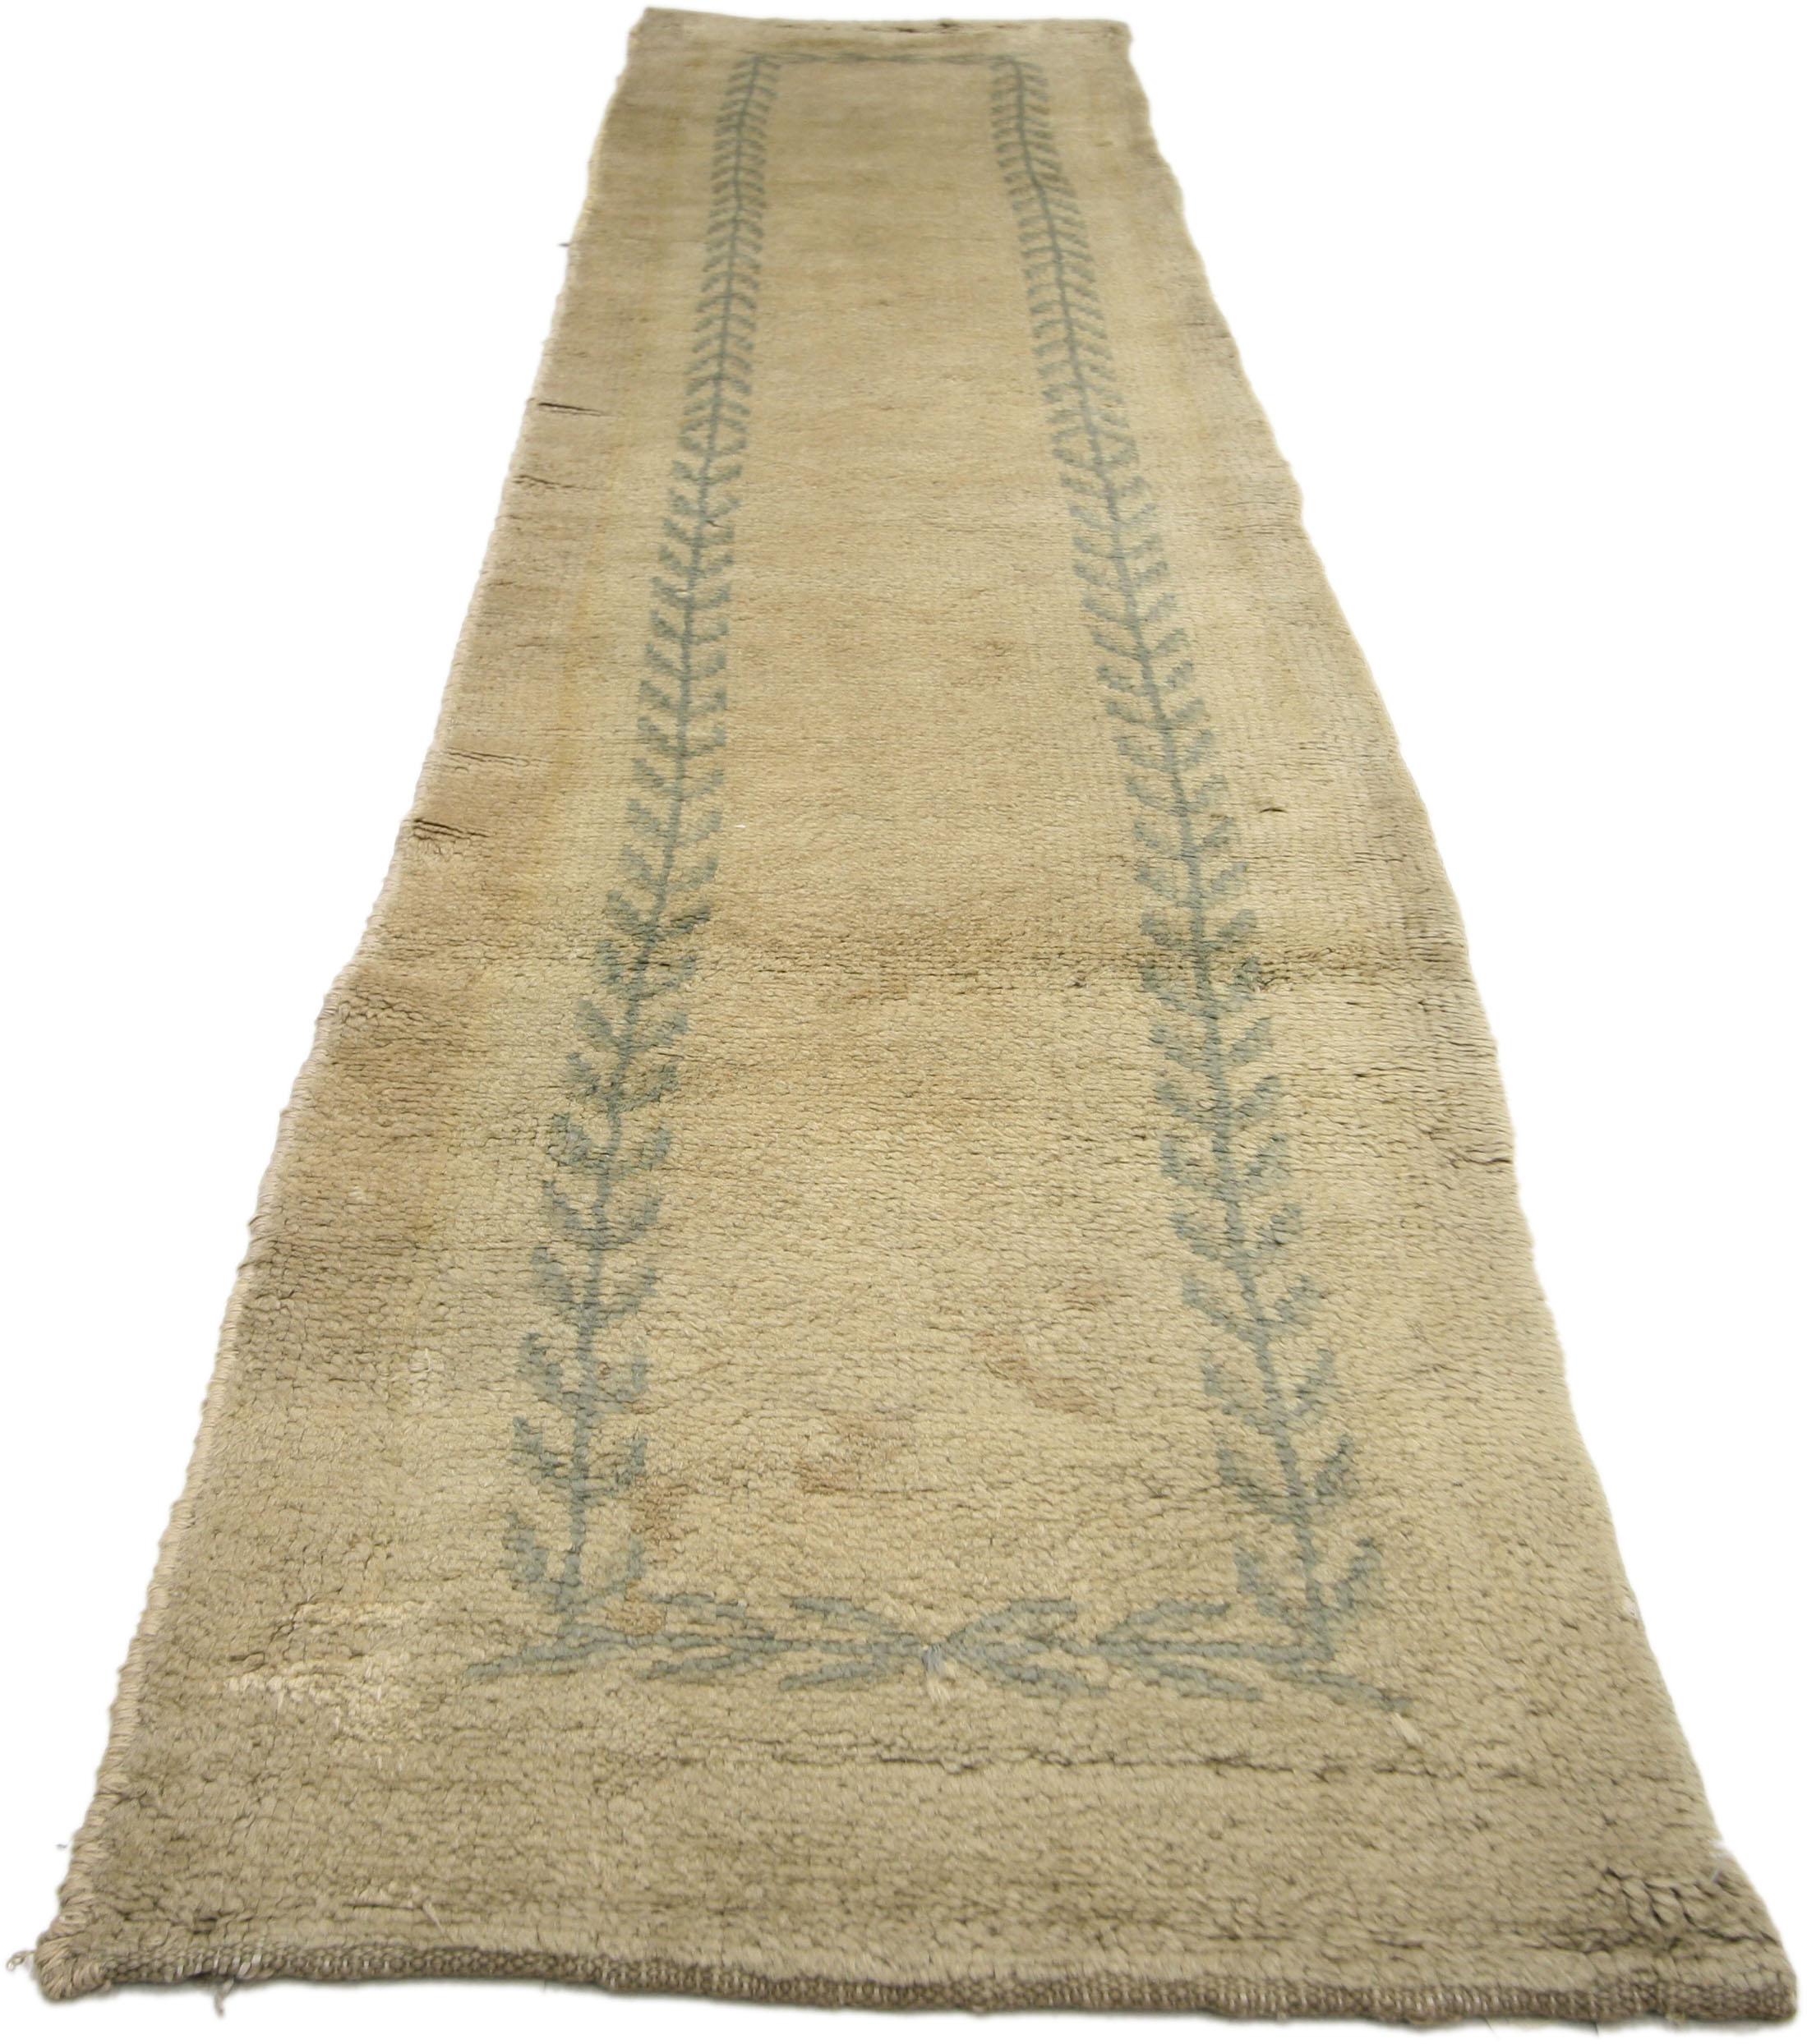 Aubusson Antique Savonnerie Runner with French Country Style, Narrow Hallway Runner For Sale